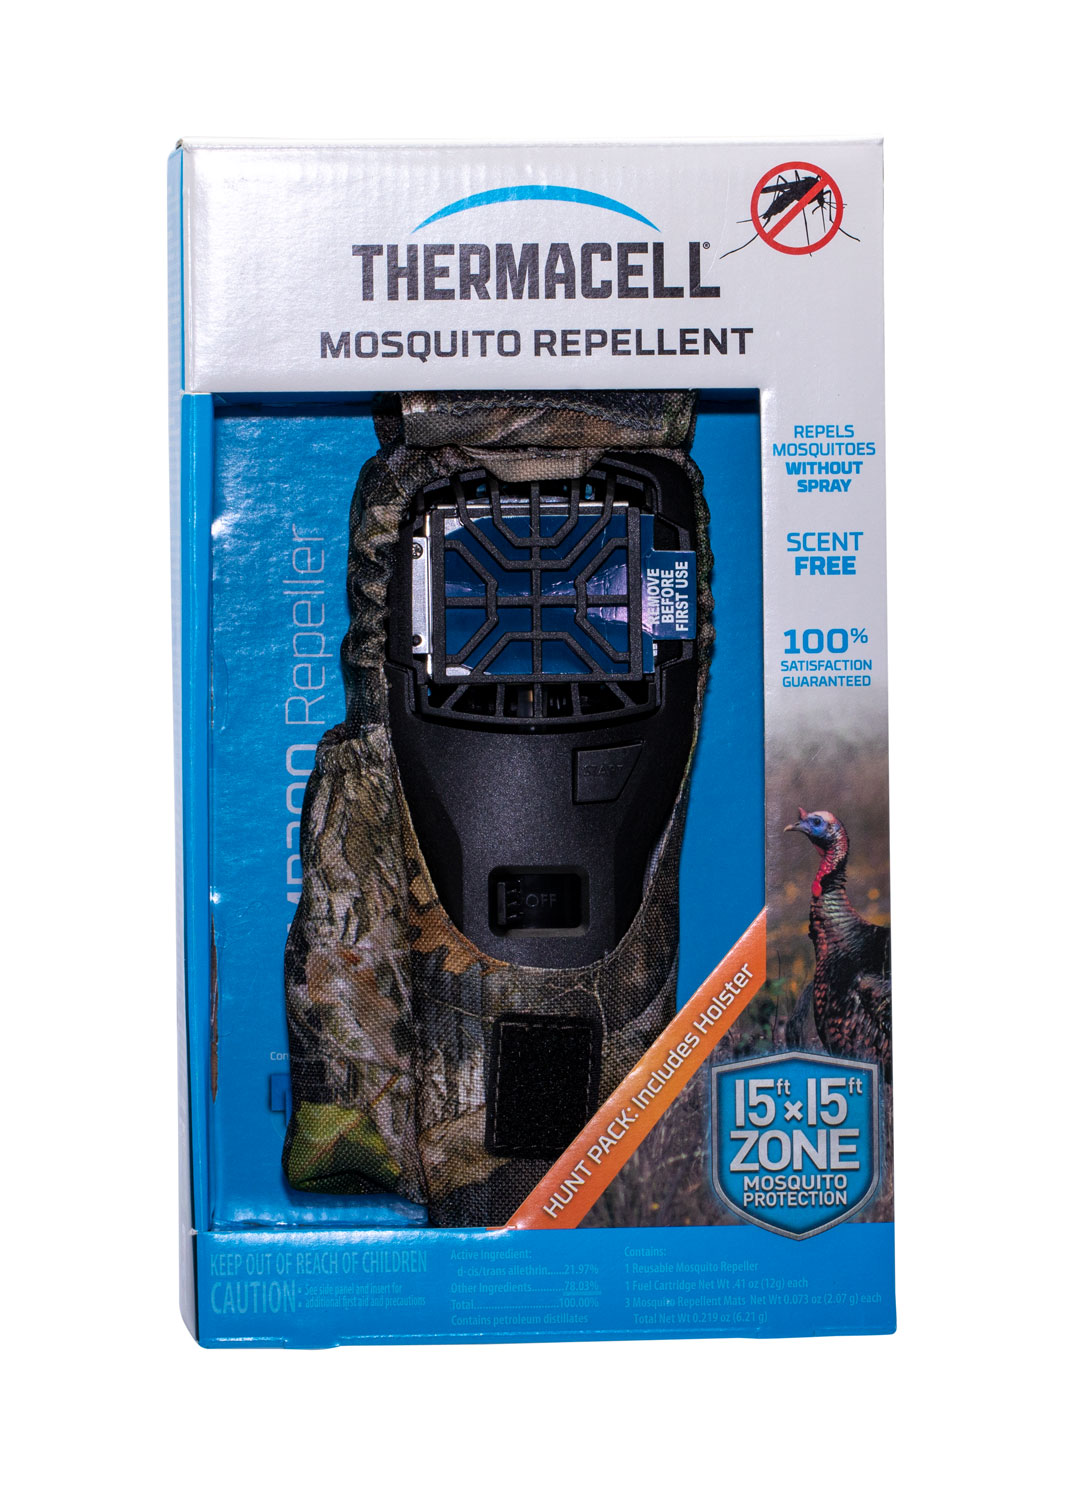 Thermacell MR300F MR300 Portable Repeller Camo Effective 15 ft Odorless Repellent Effective Up to 12 hrs